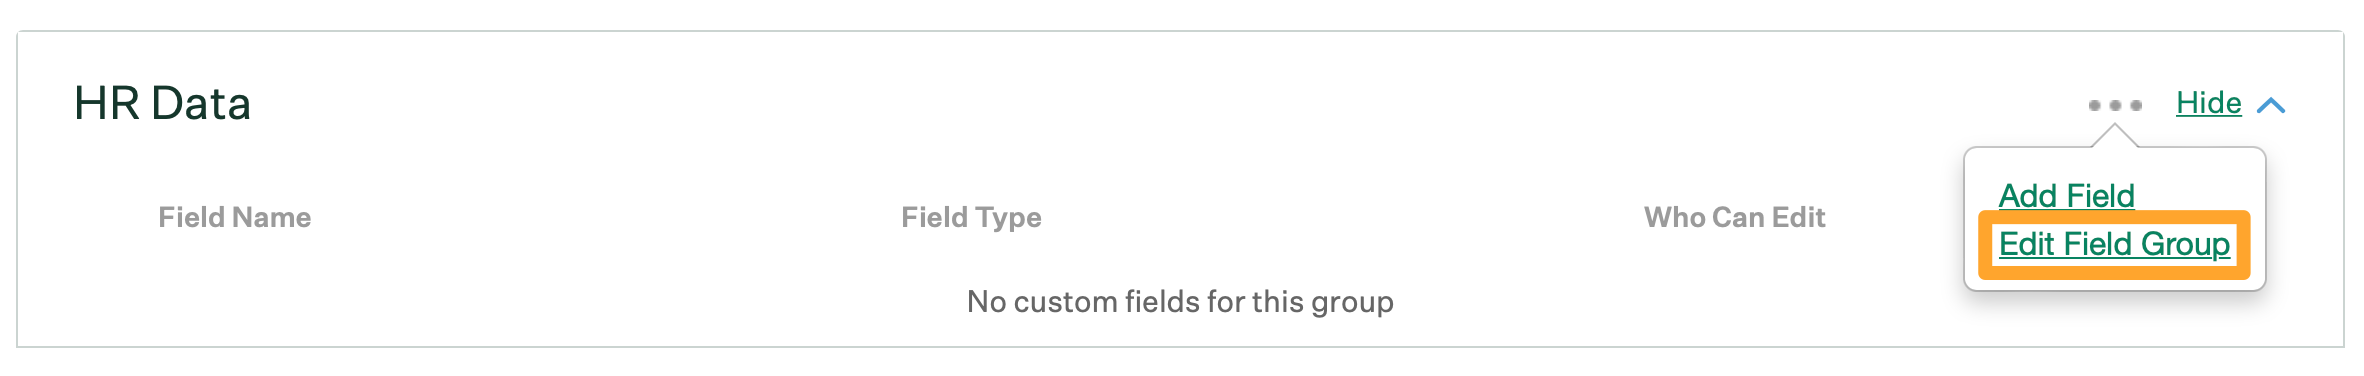 Edit Field Group option highlighted in dropdown next to field group